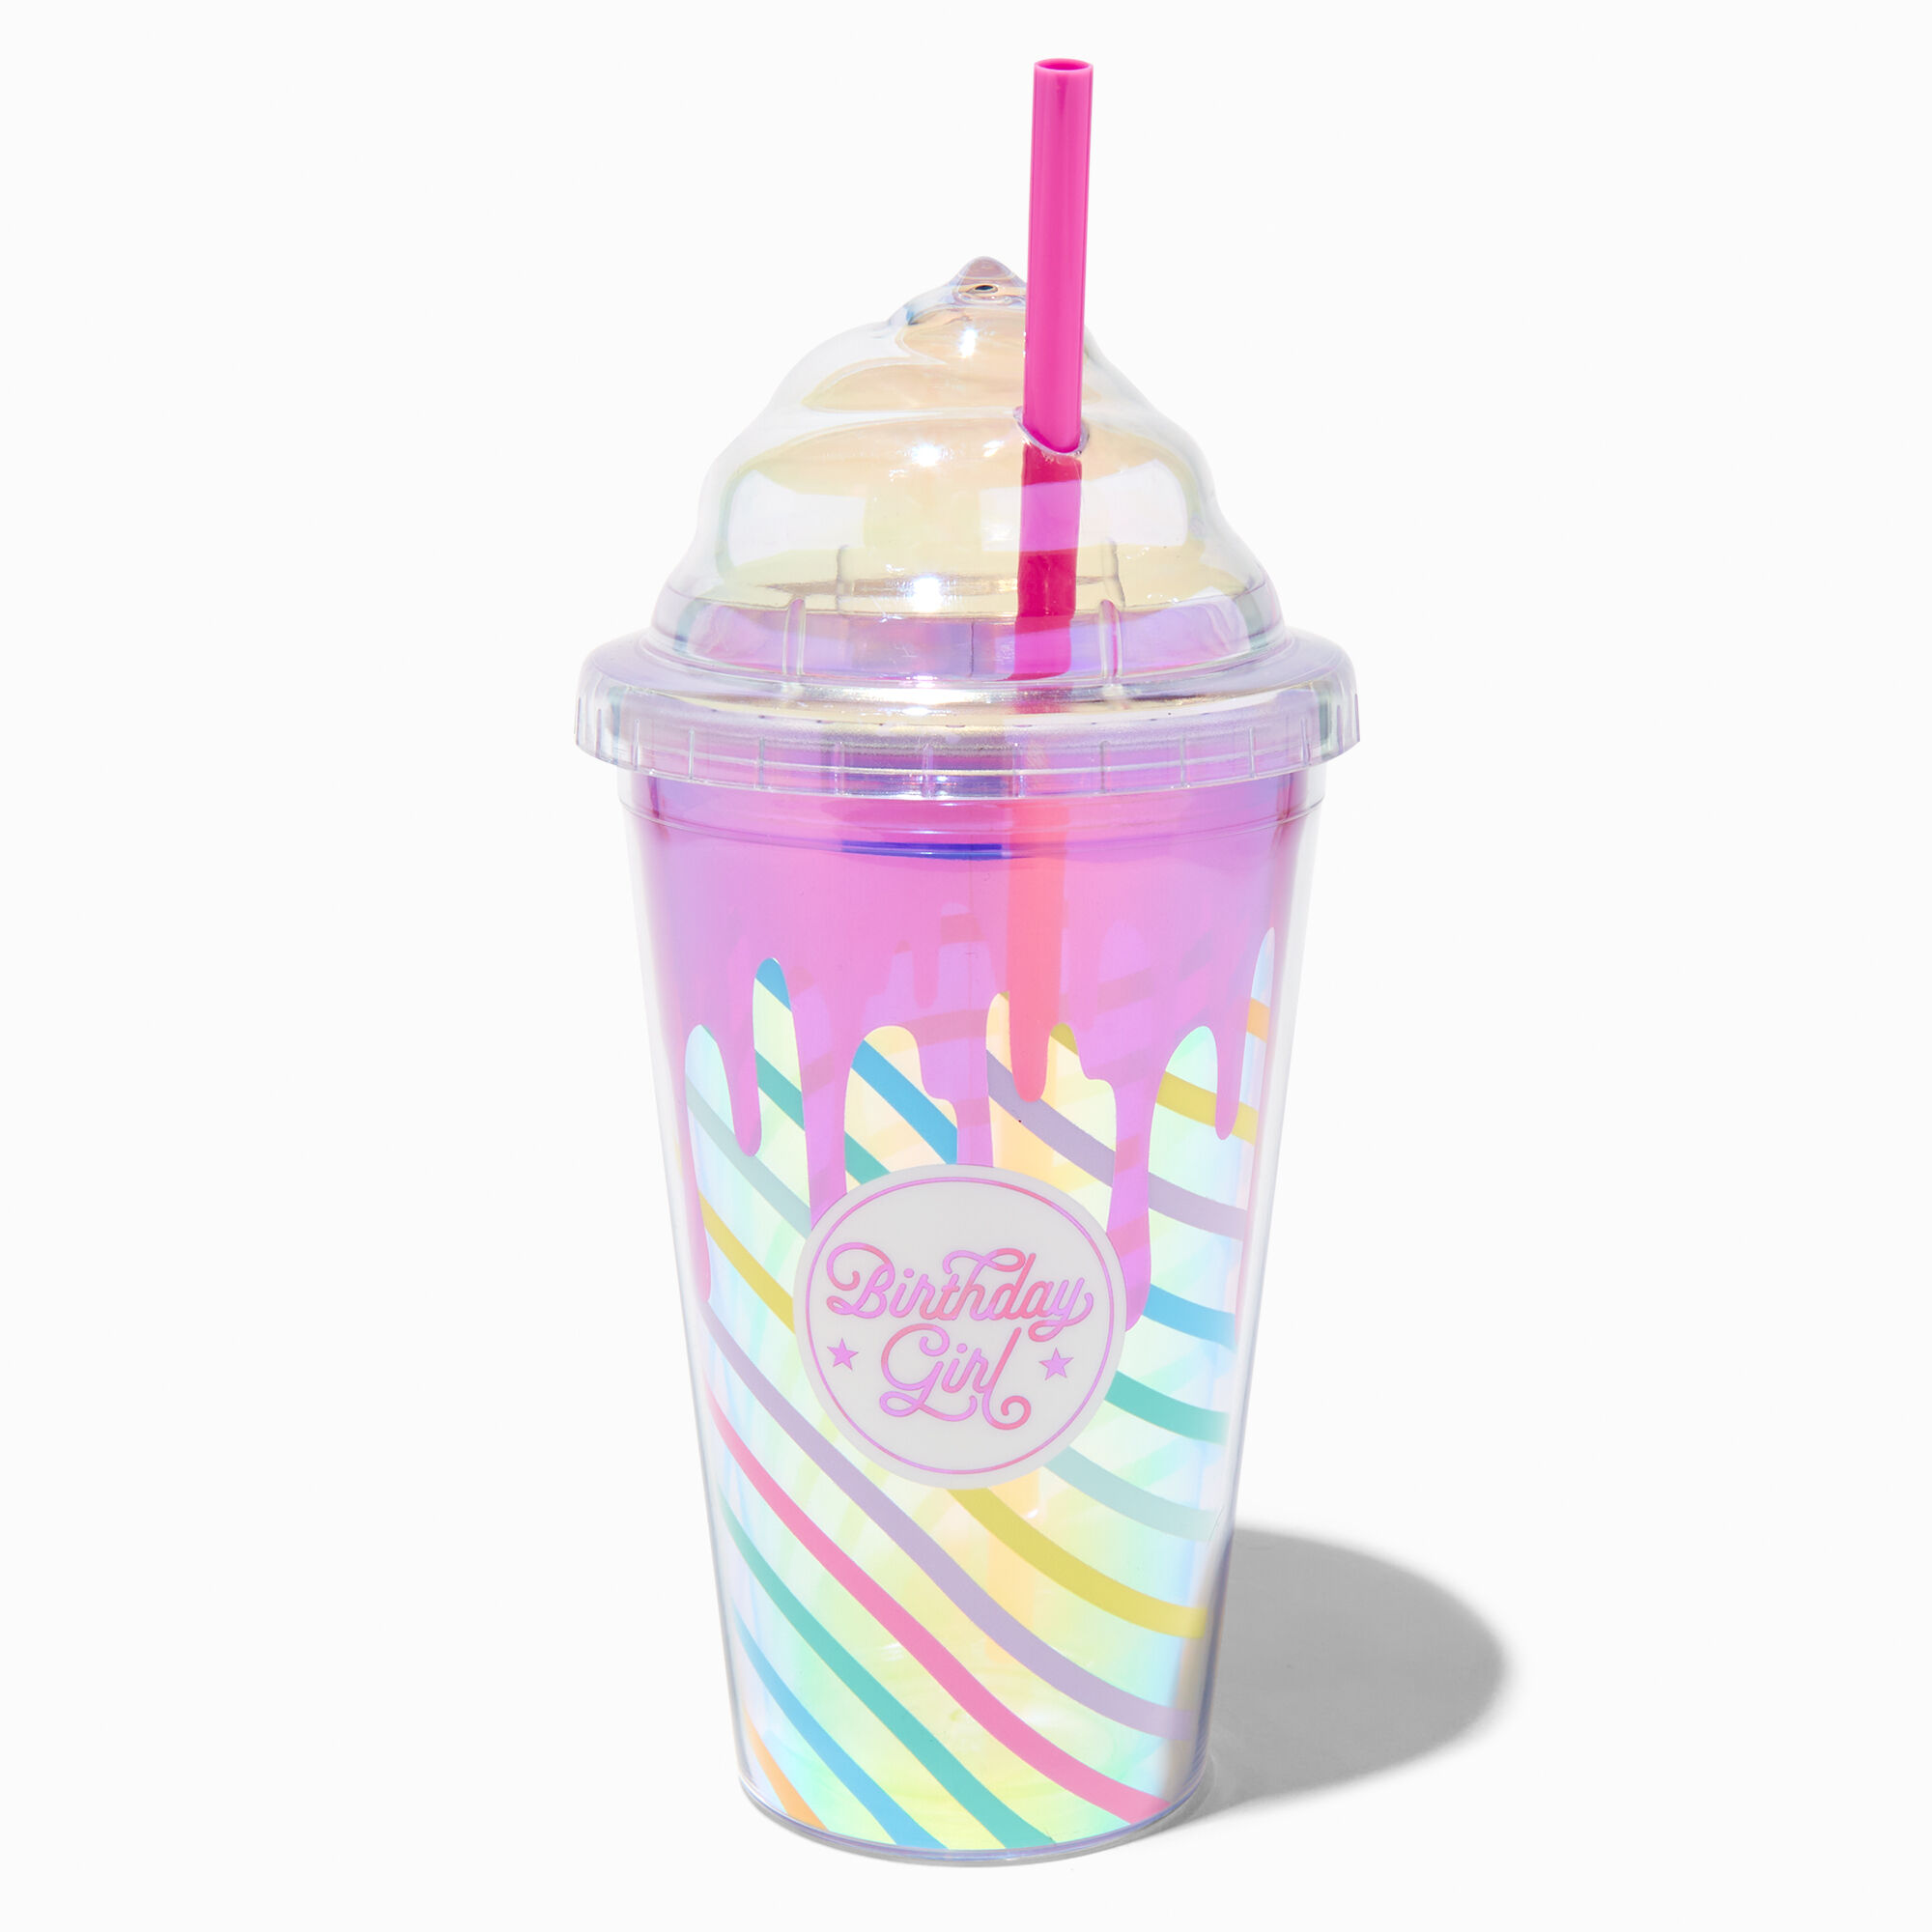 View Claires Birthday Girl Drip Design Lidded Tumbler information